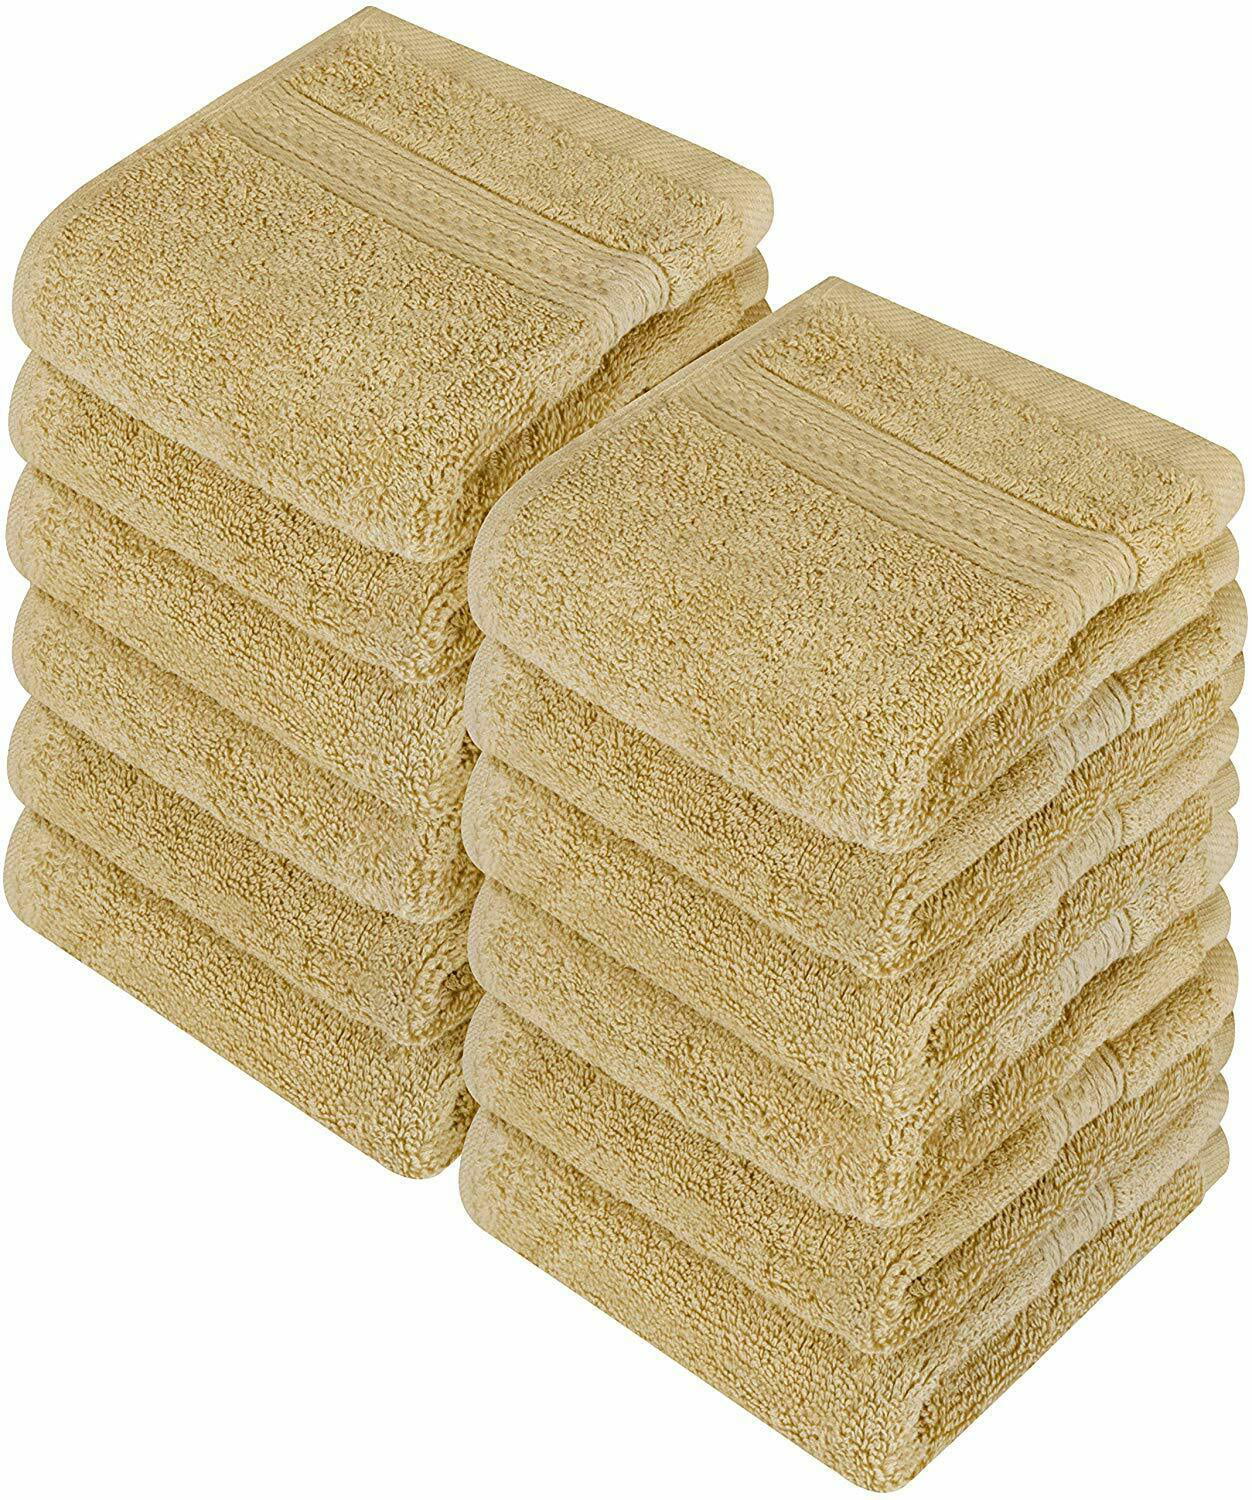 LUXURY 700 GSM PACK OF 12 100% COTTON FACE CLOTH TOWELS FLANNELS WASH CLOTH !!! 